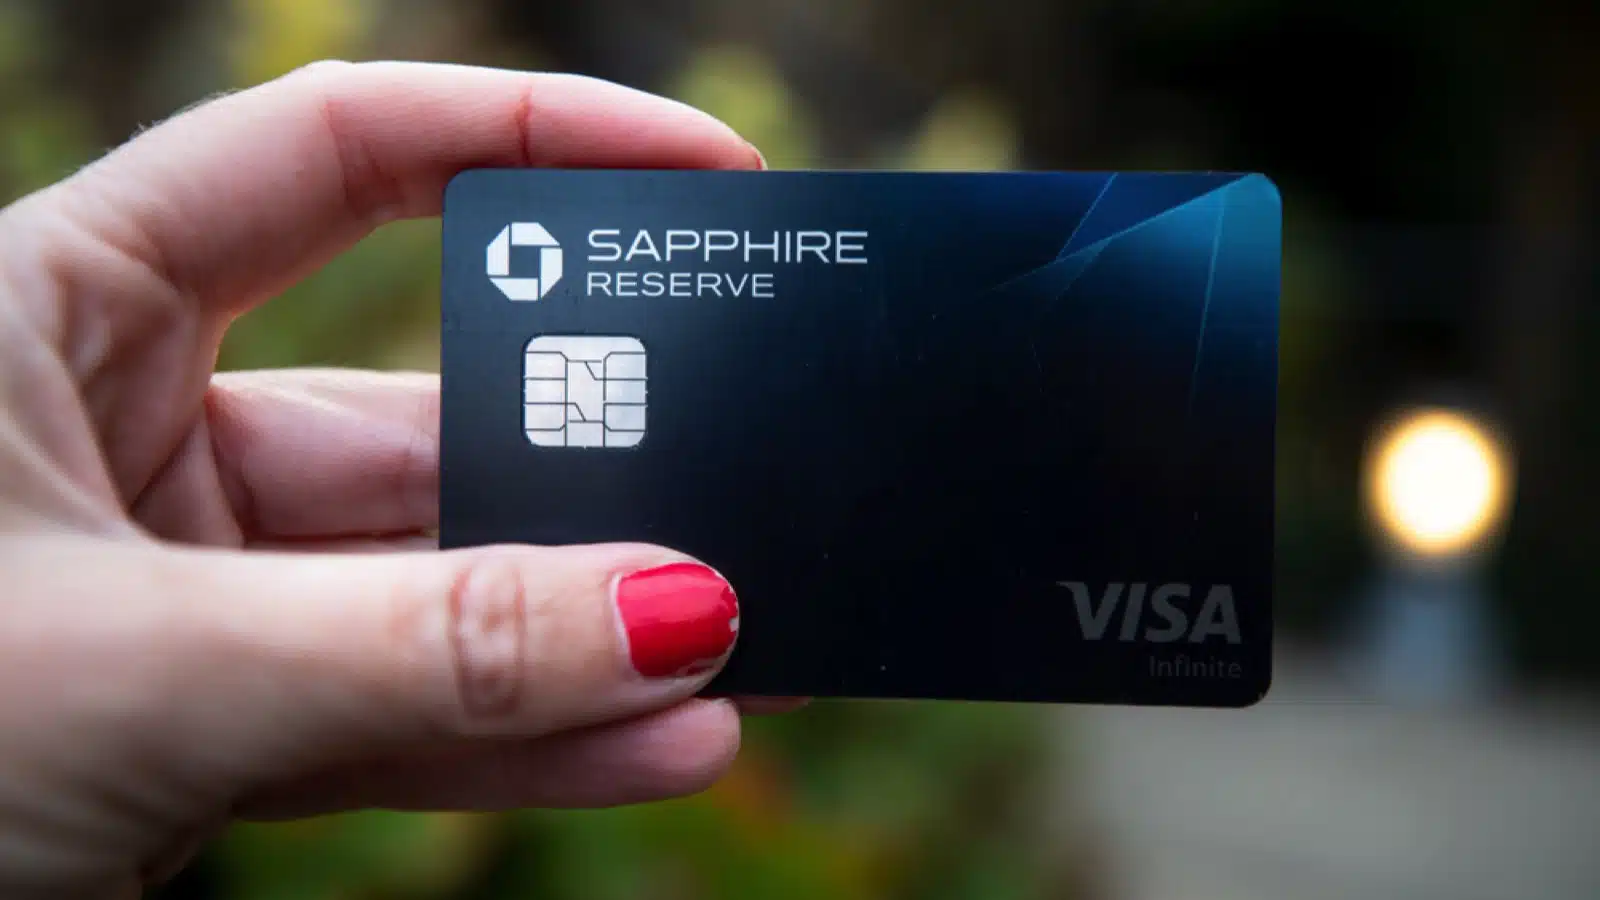 Chase Sapphire Reserve credit card